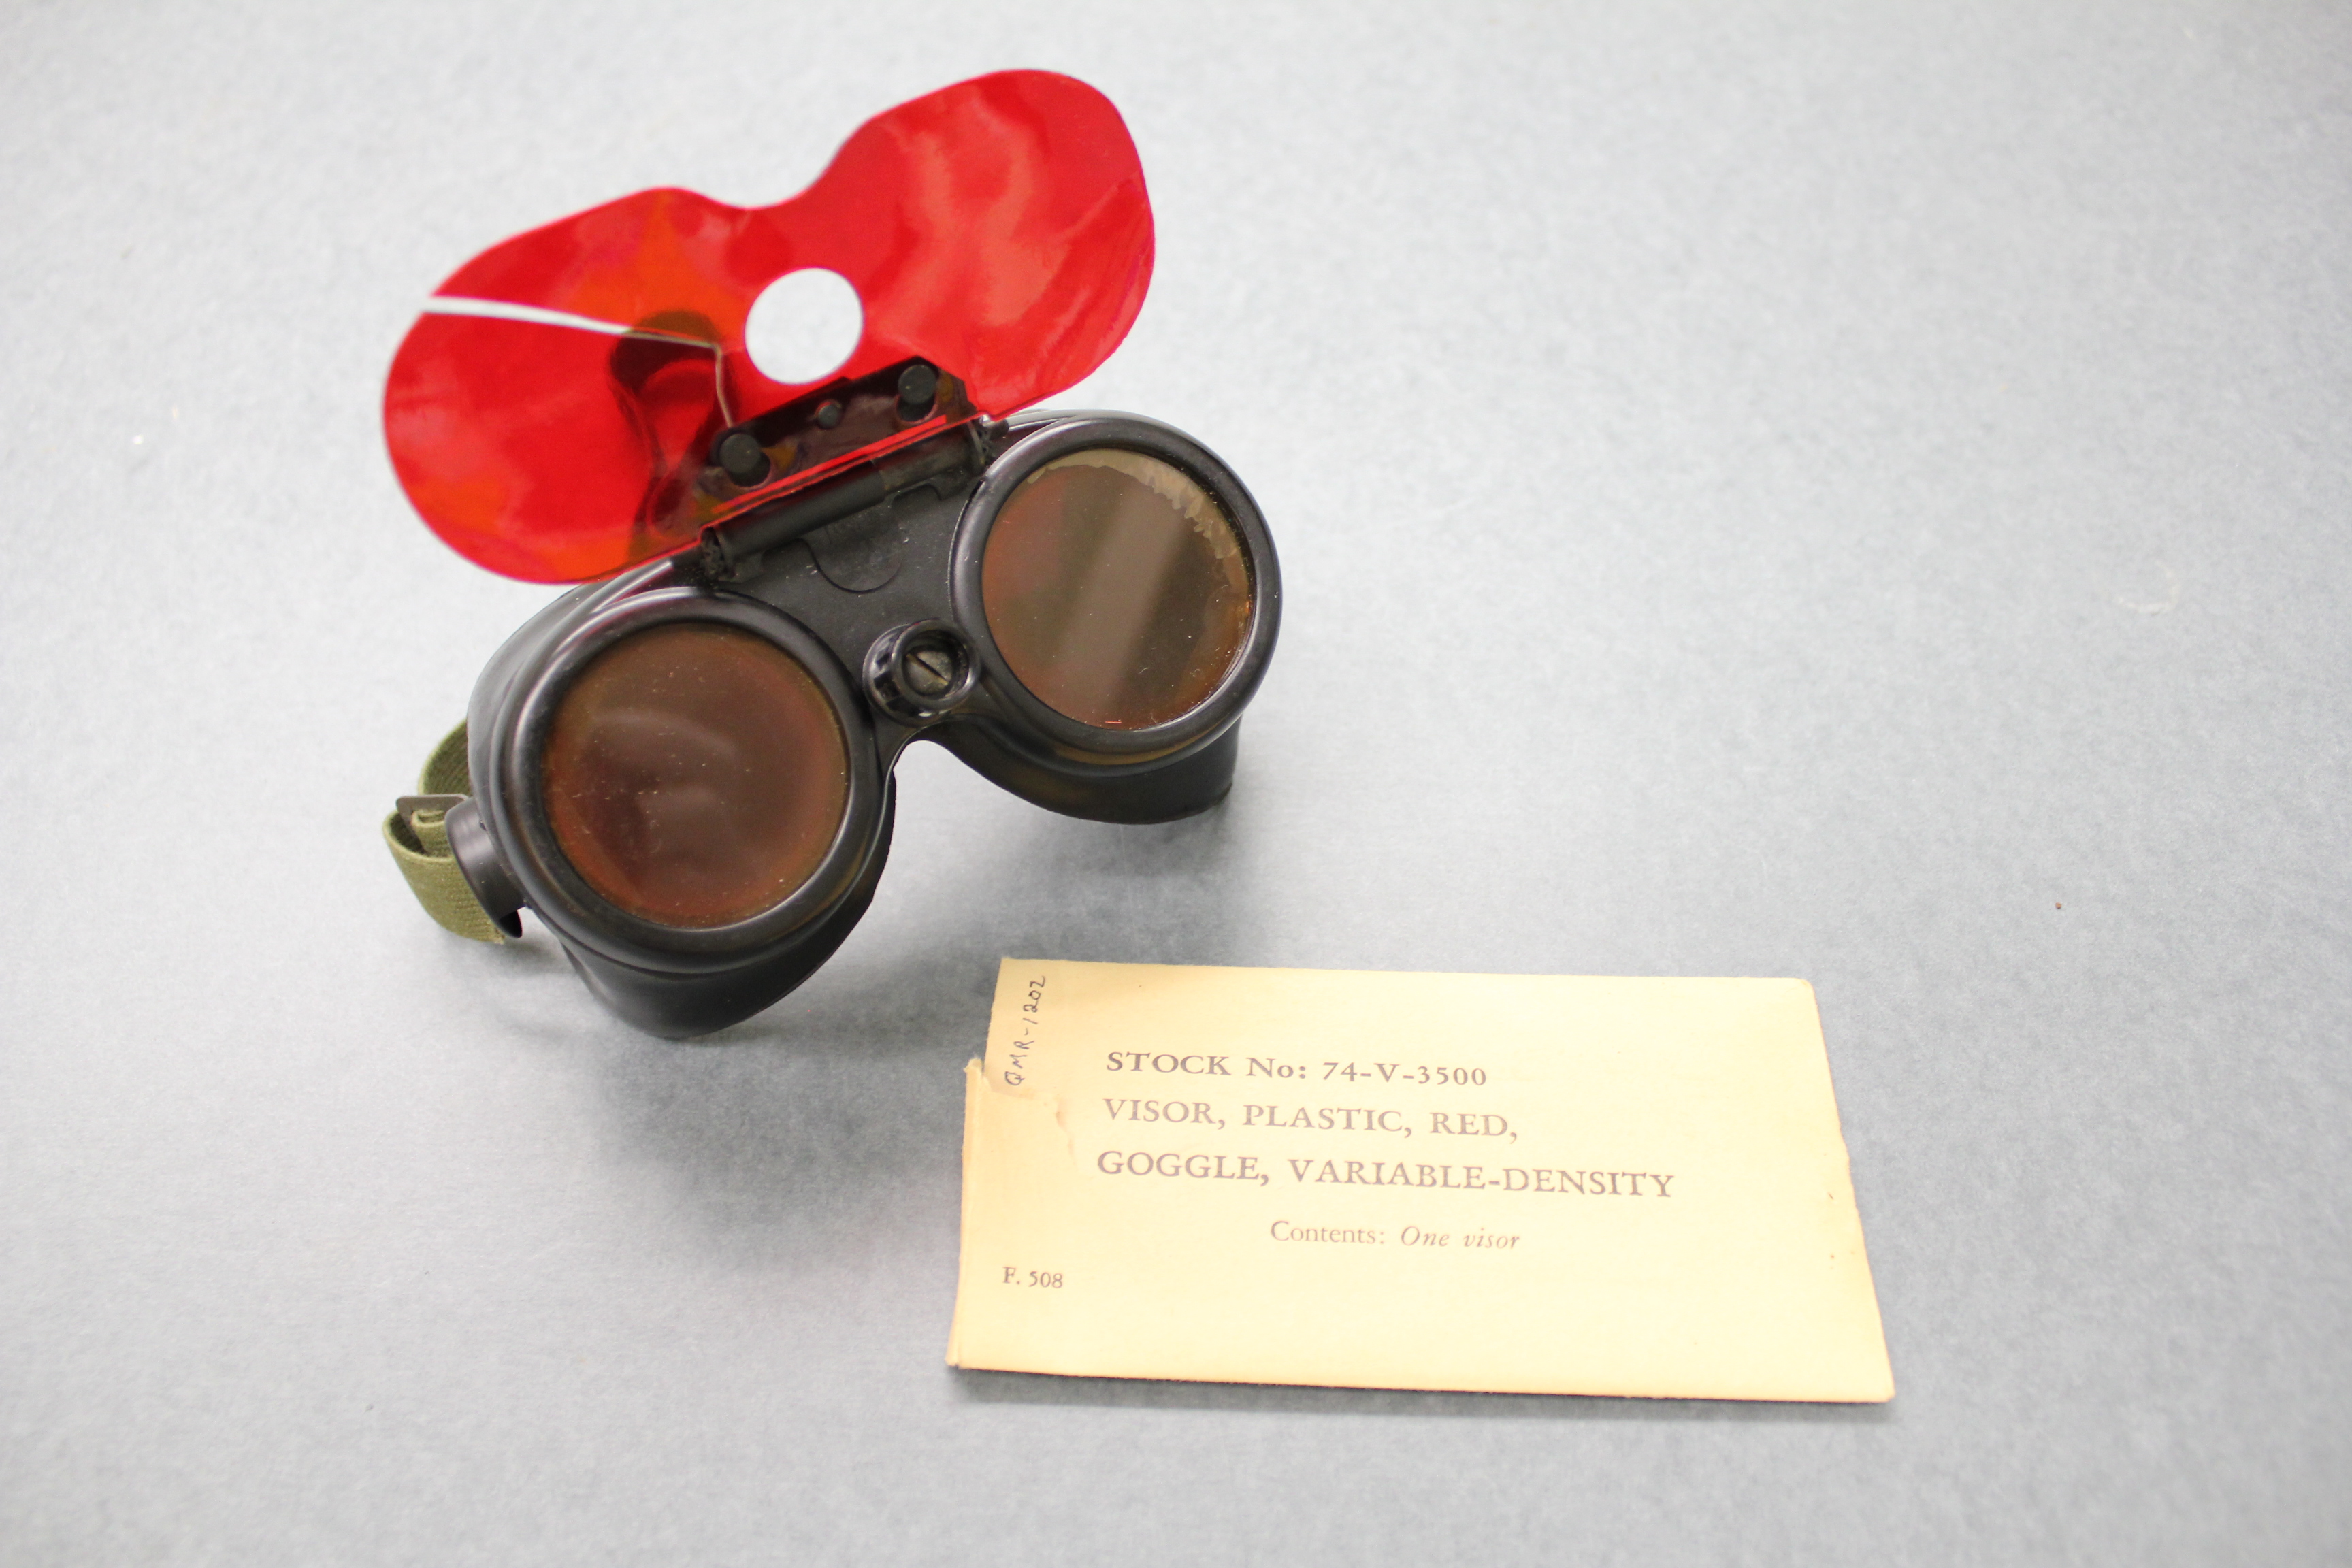  Variable Density Goggles